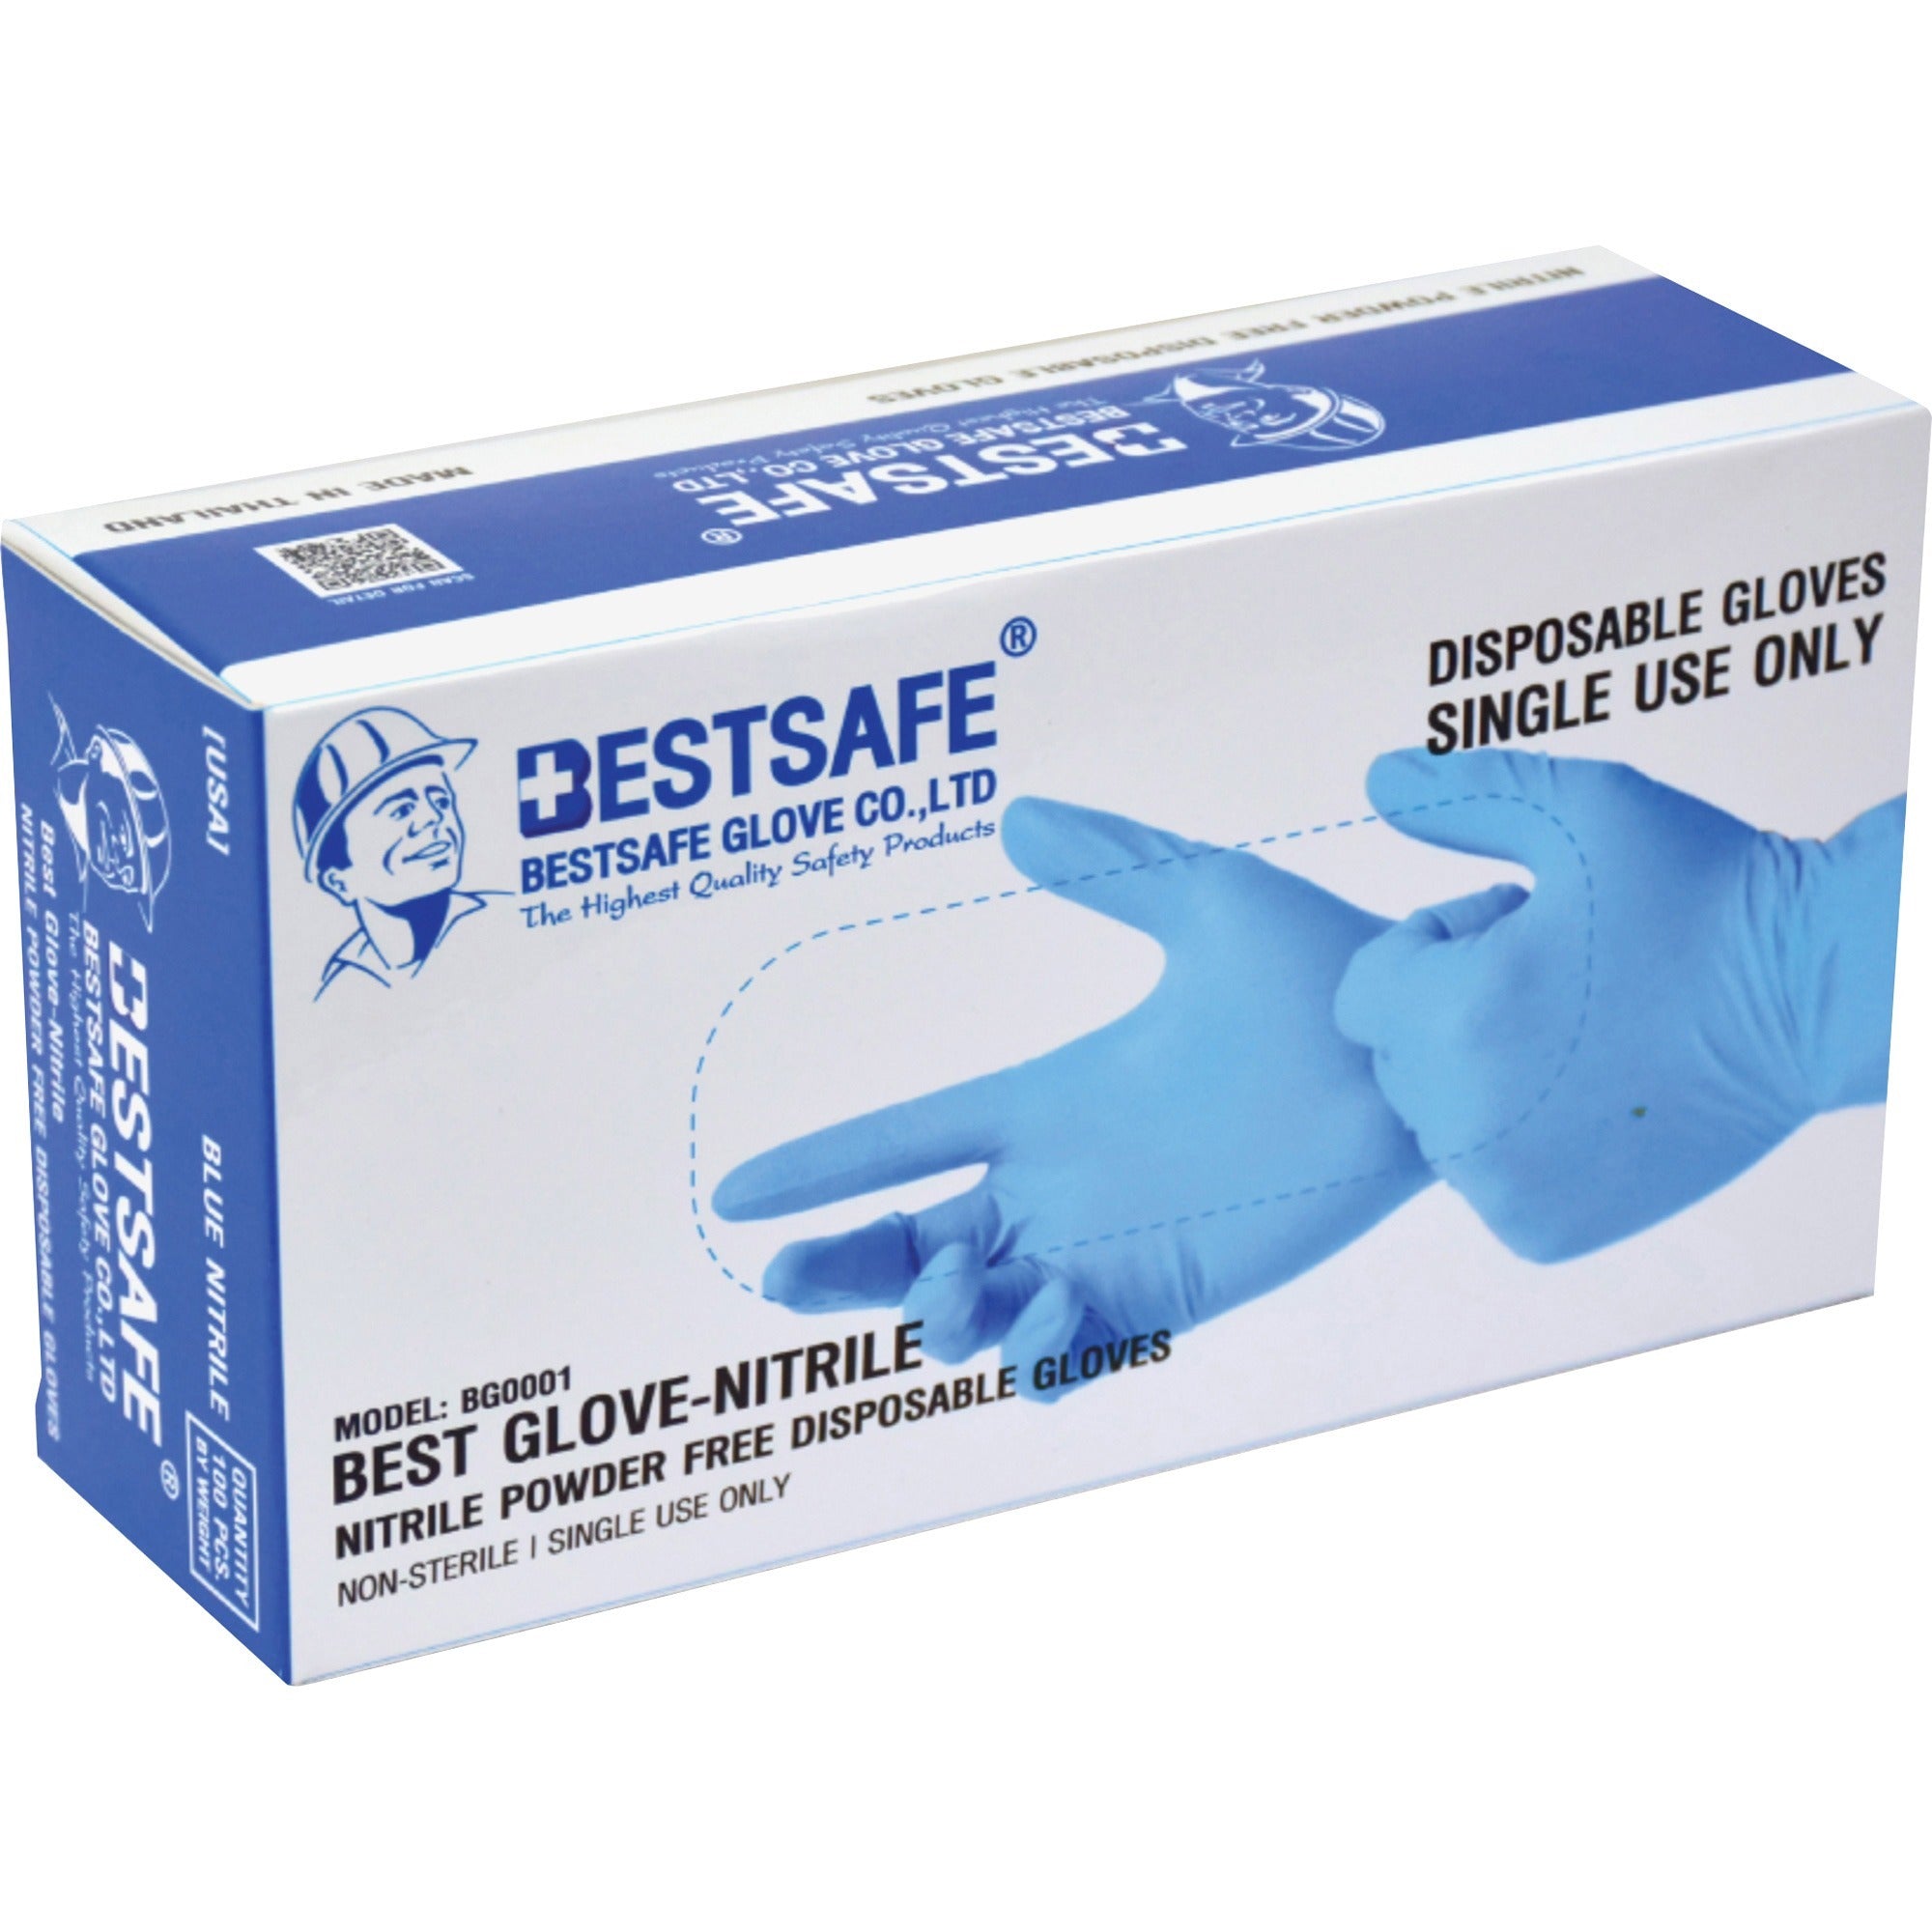 bestsafe-single-use-nitrile-glove-contaminant-protection-large-size-for-right-left-hand-blue-puncture-resistant-latex-free-for-multipurpose-100-box-4-mil-thickness_spzntrglv4l - 1